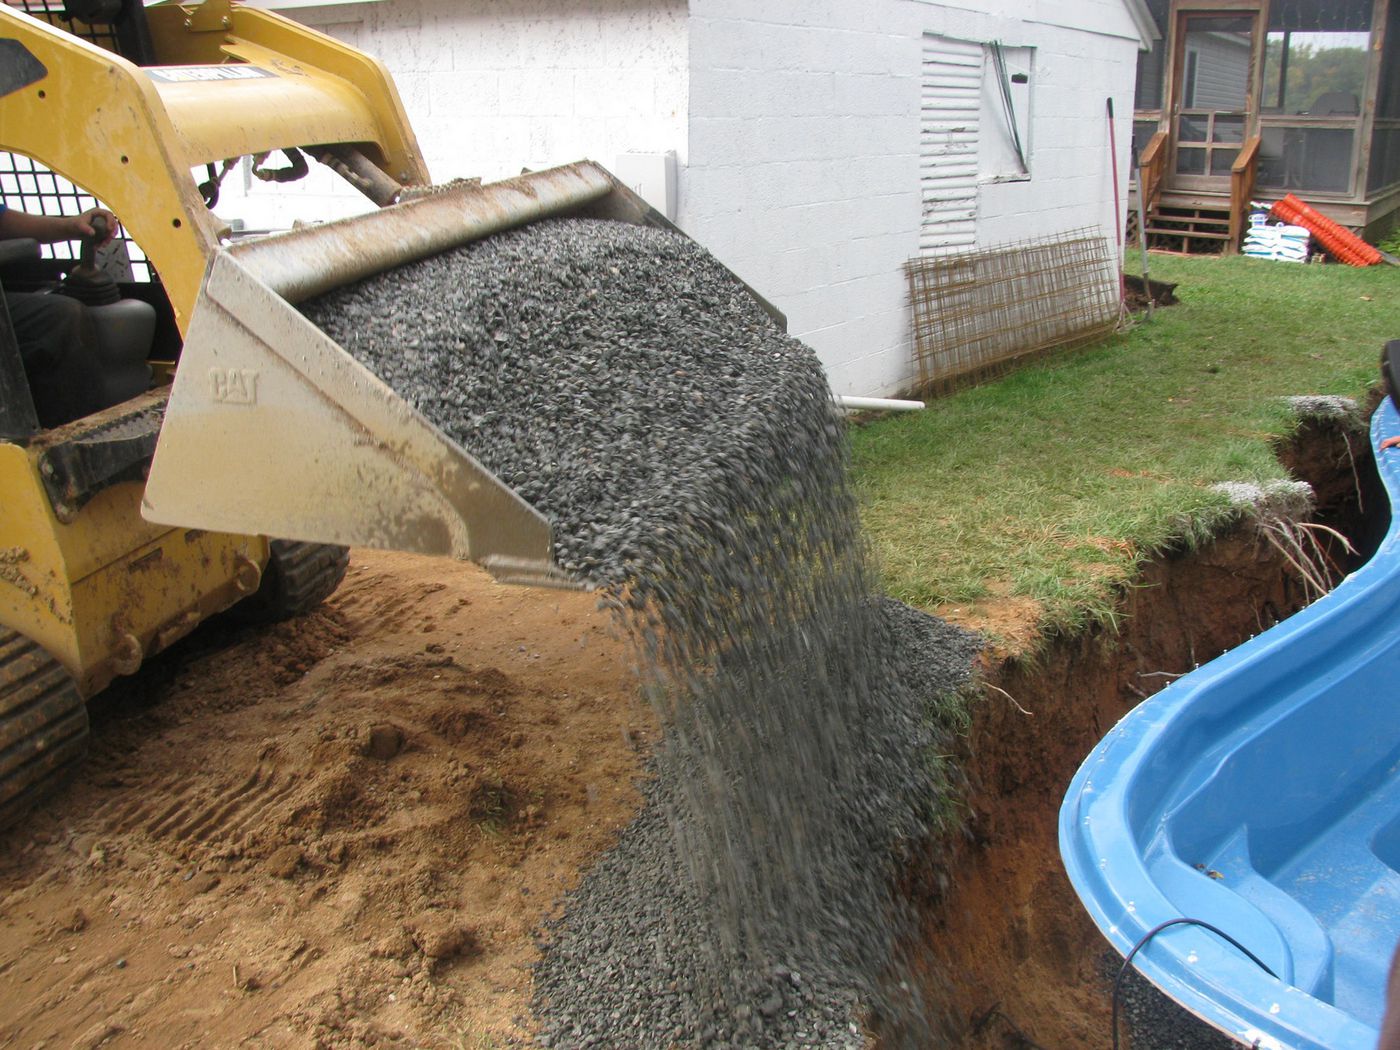 How Much and What Type of Gravel Does a Fiberglass Pool Installation Need?